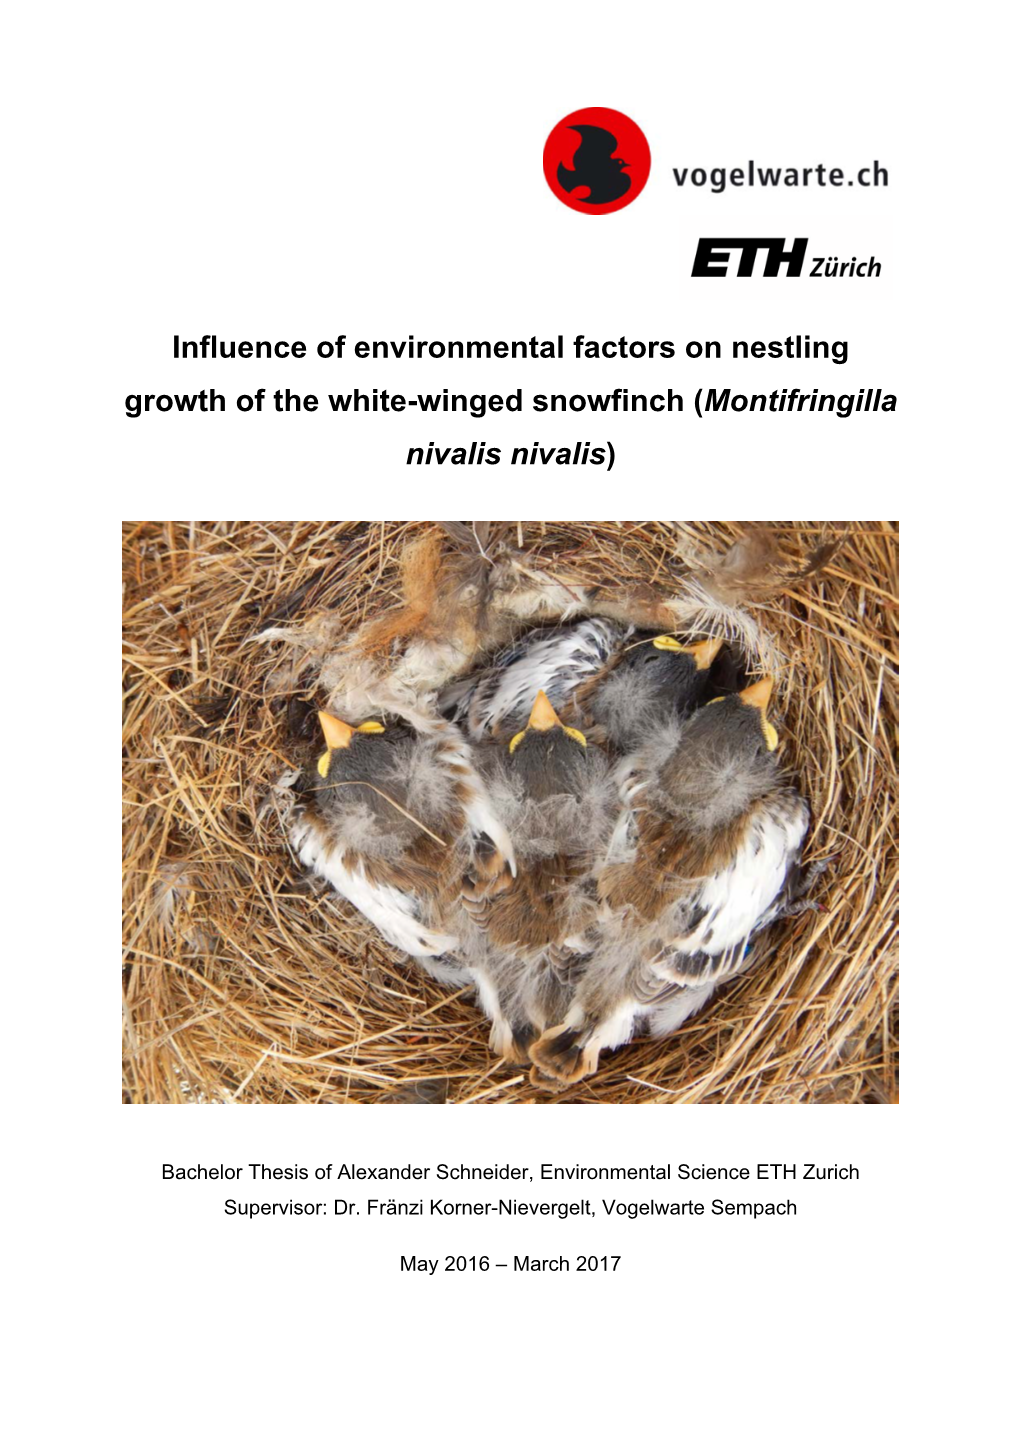 Influence of Environmental Factors on Nestling Growth of the White-Winged Snowfinch (Montifringilla Nivalis Nivalis)